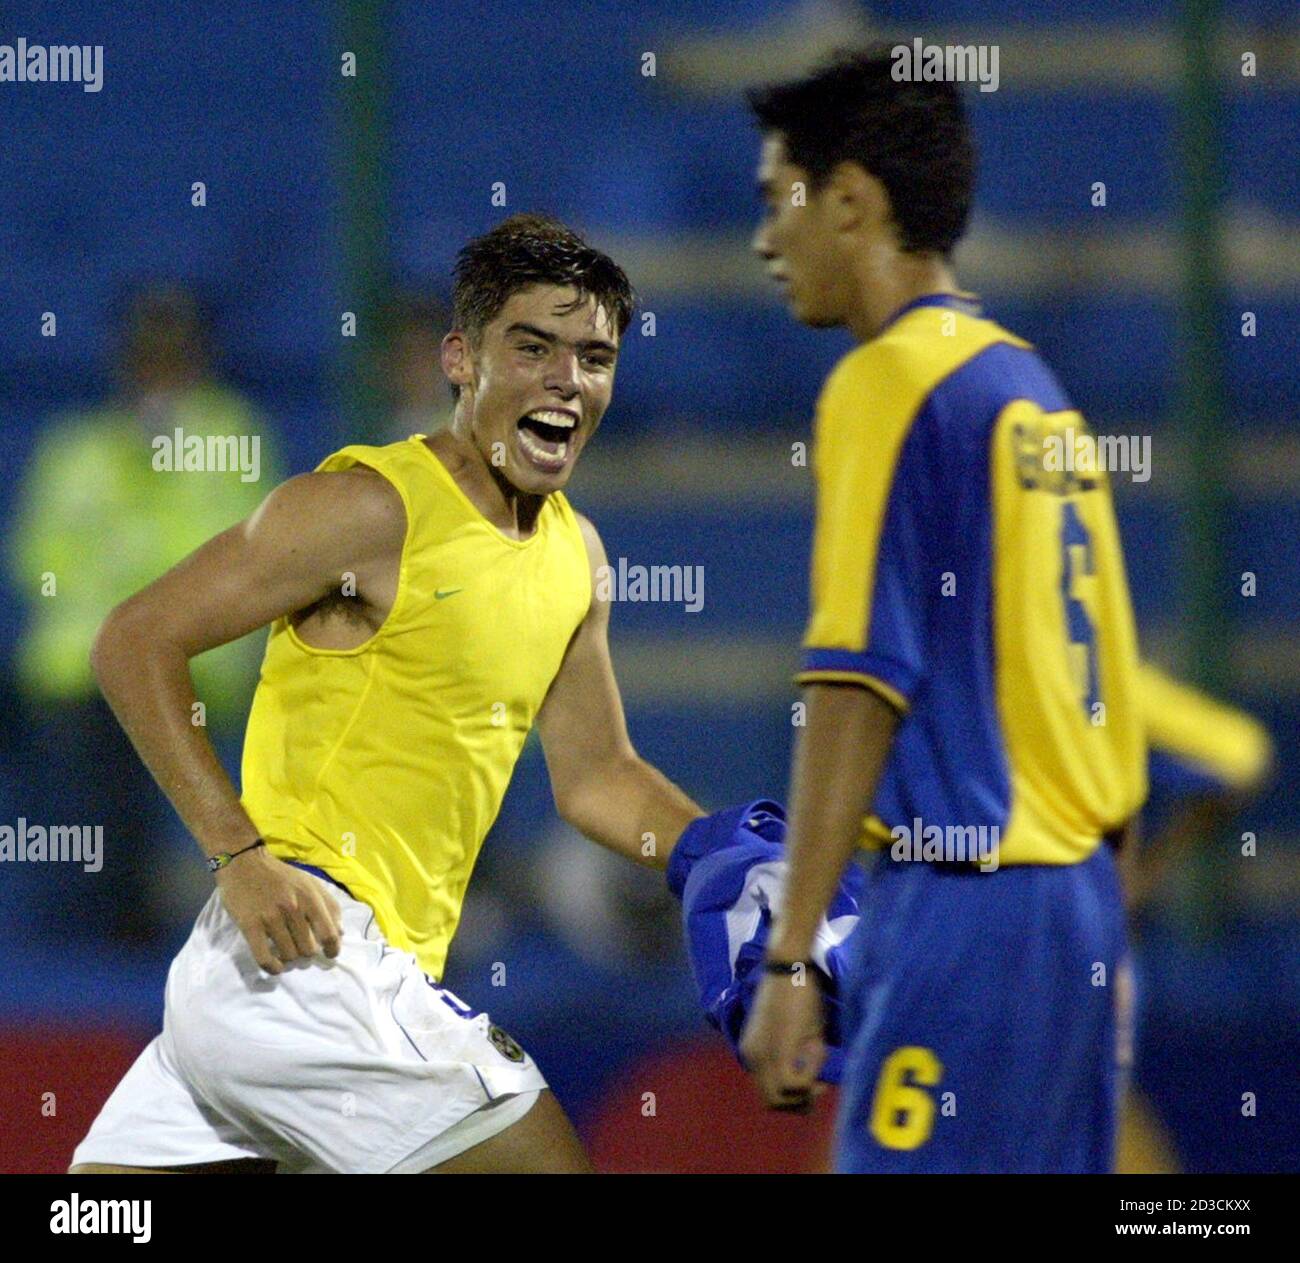 Brazilian Jean Carlos Donde runs past Colombian Andres Felipe Gonzalez  after he scored his team's third goal during the second half of their  second round Under 20 South American soccer match, in